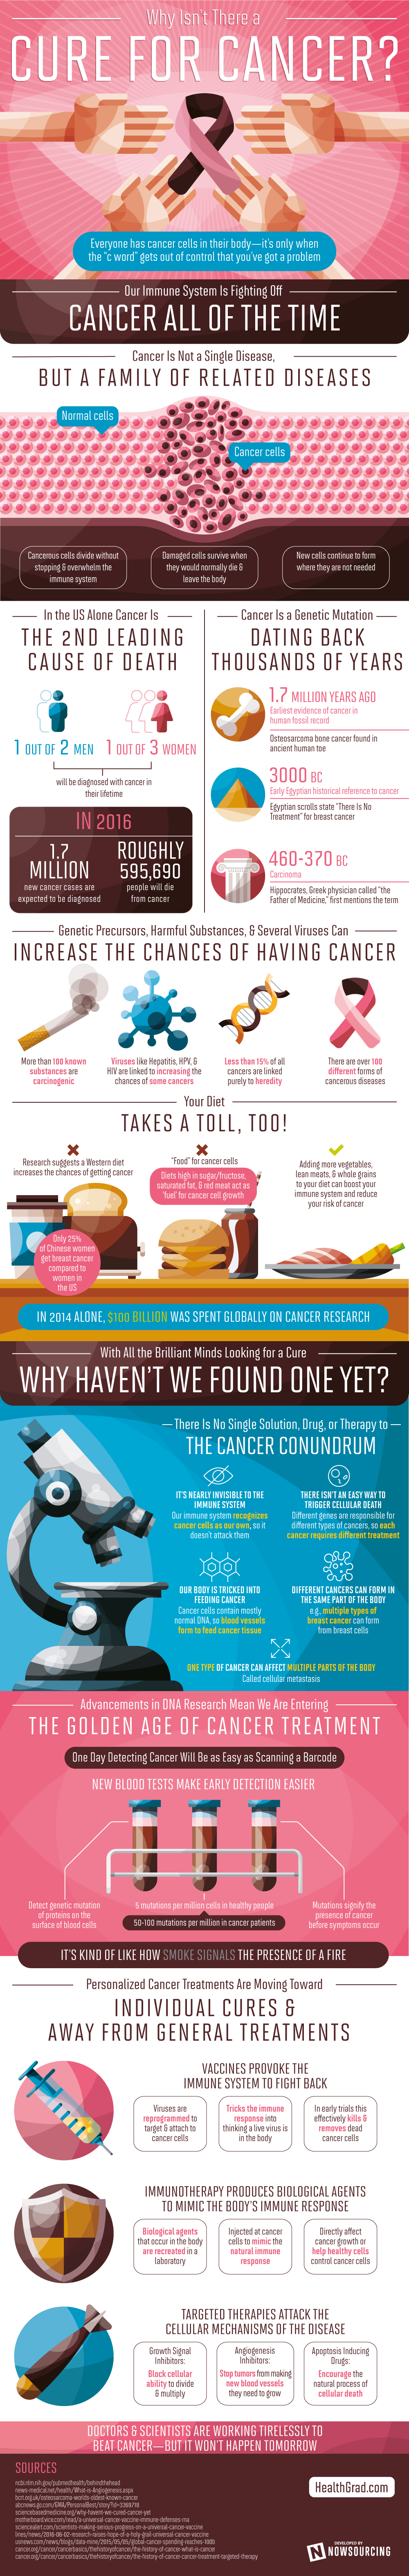 http://www.healthgrad.com/files/2016/10/why-no-cancer-cure-yet.png